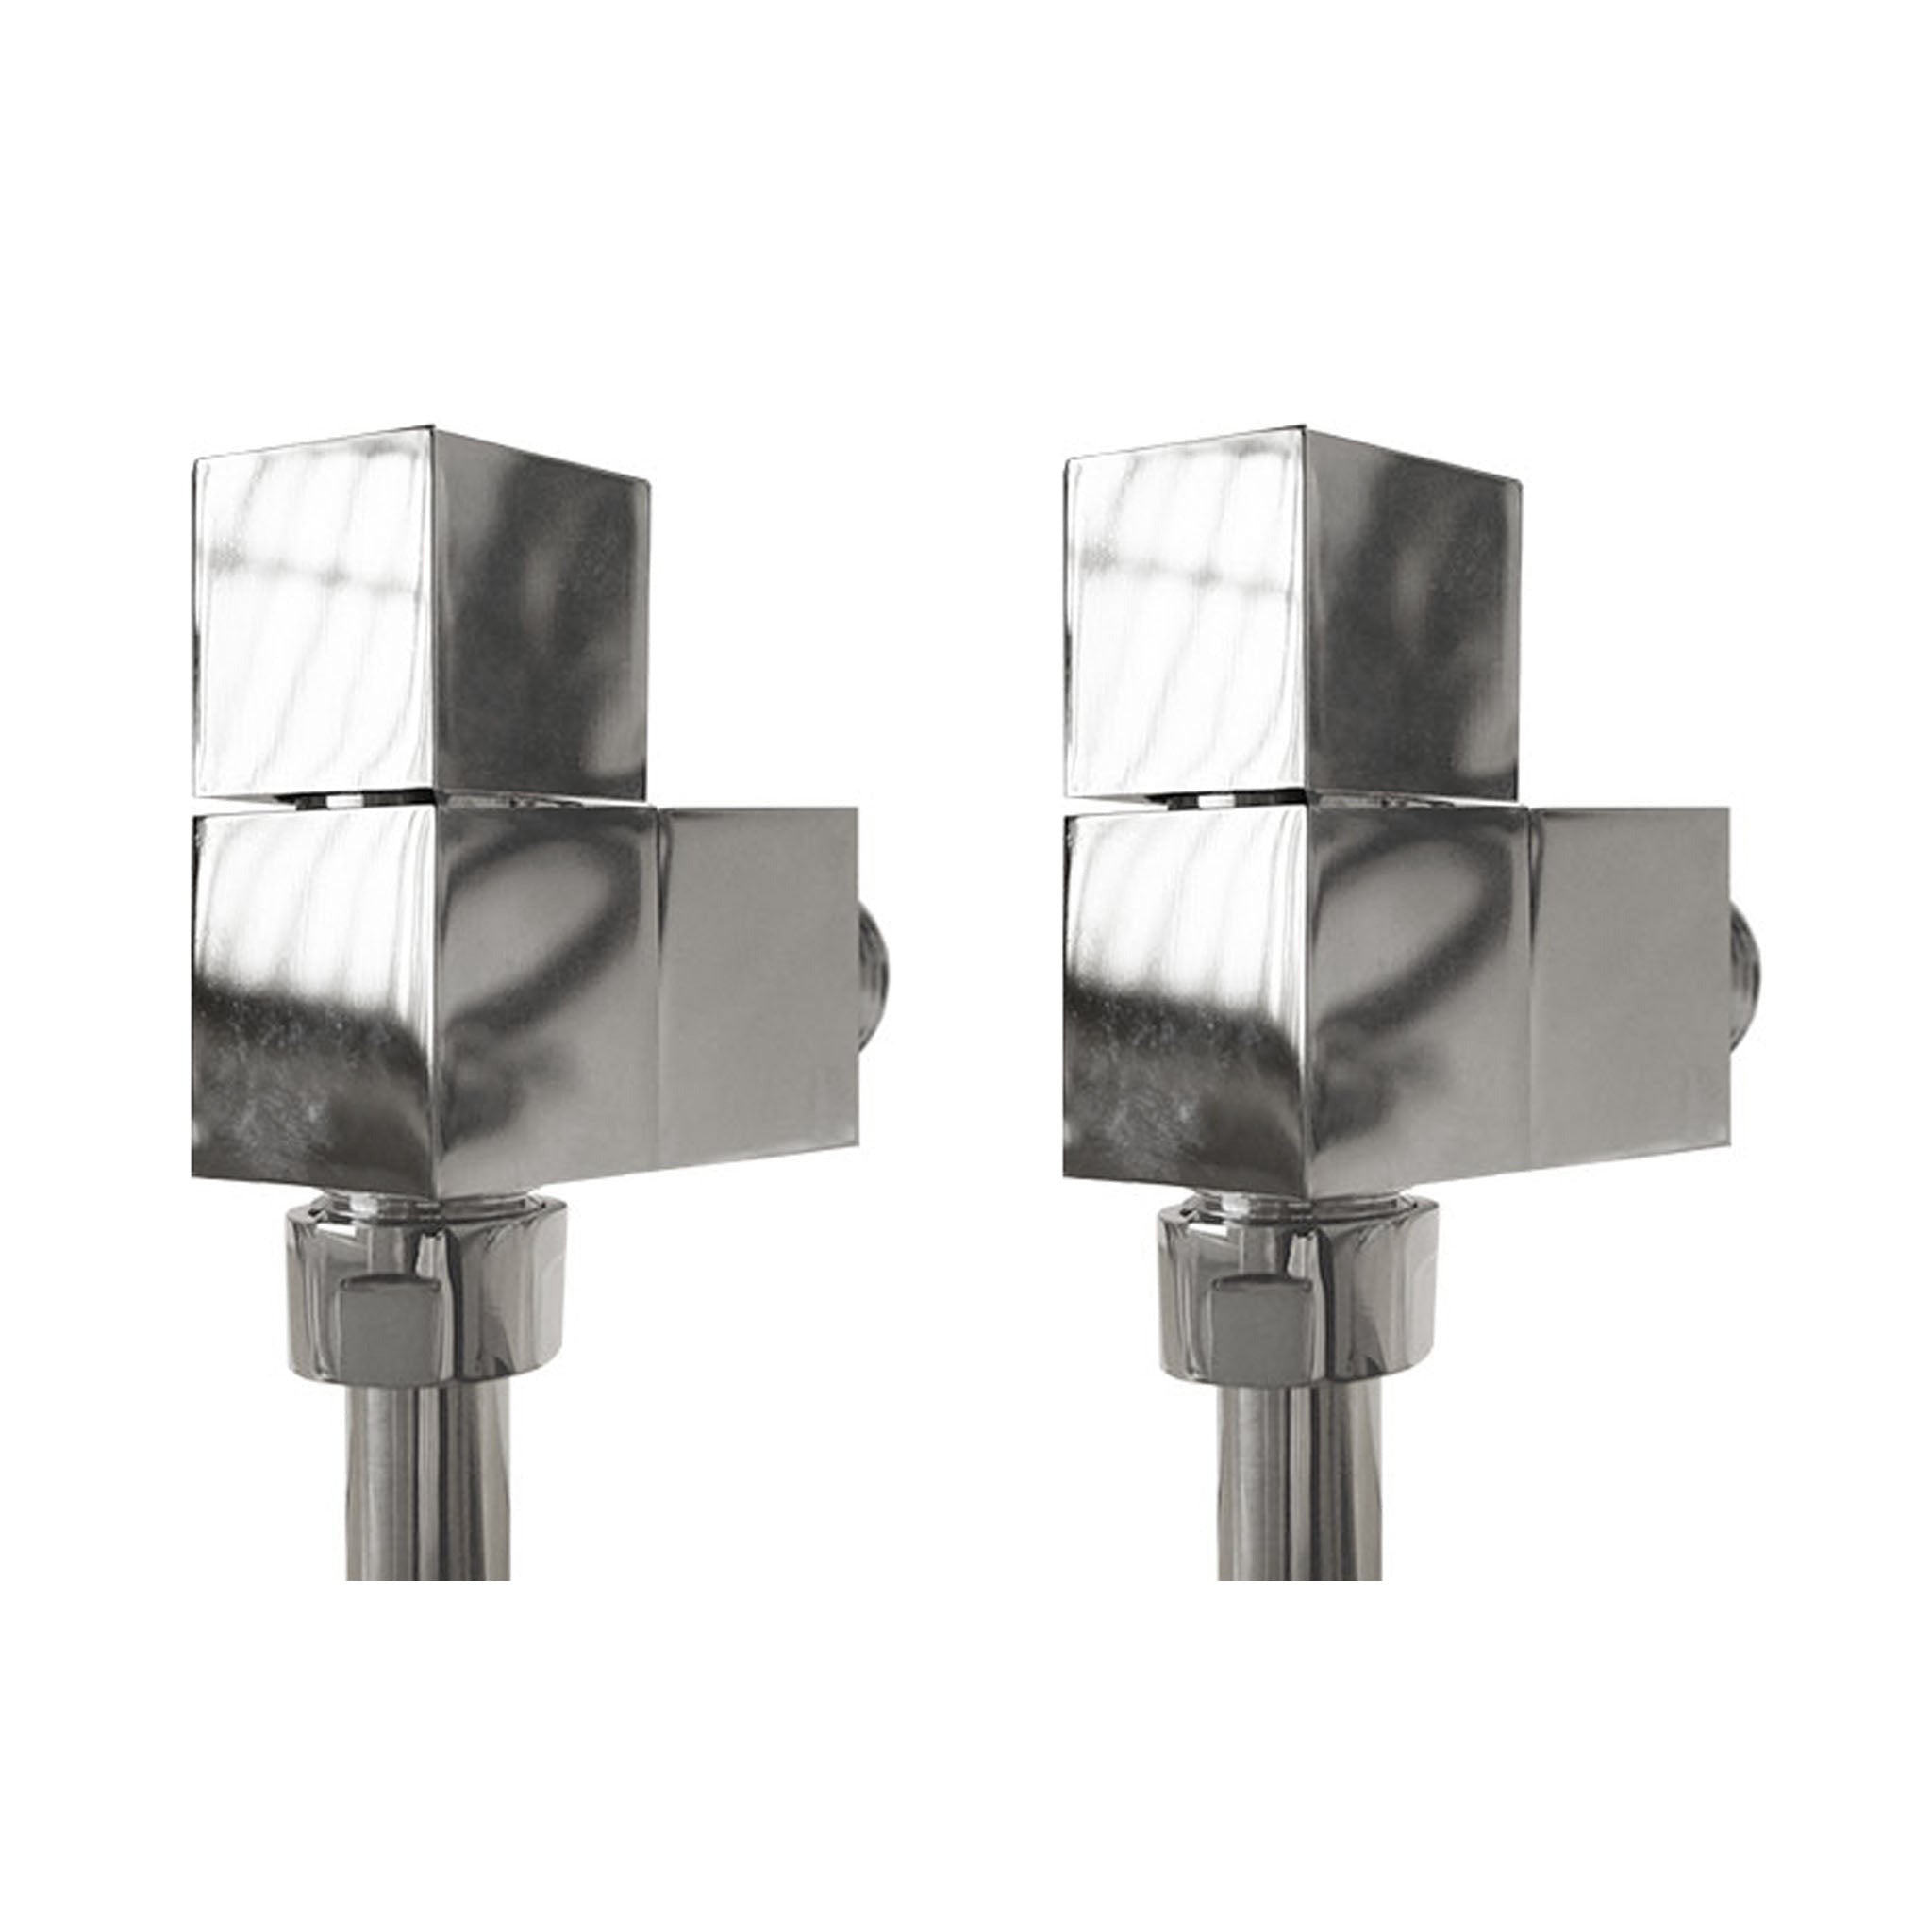 Vogue Piazza Angled Valves 1/2" x 15mm (Pair)